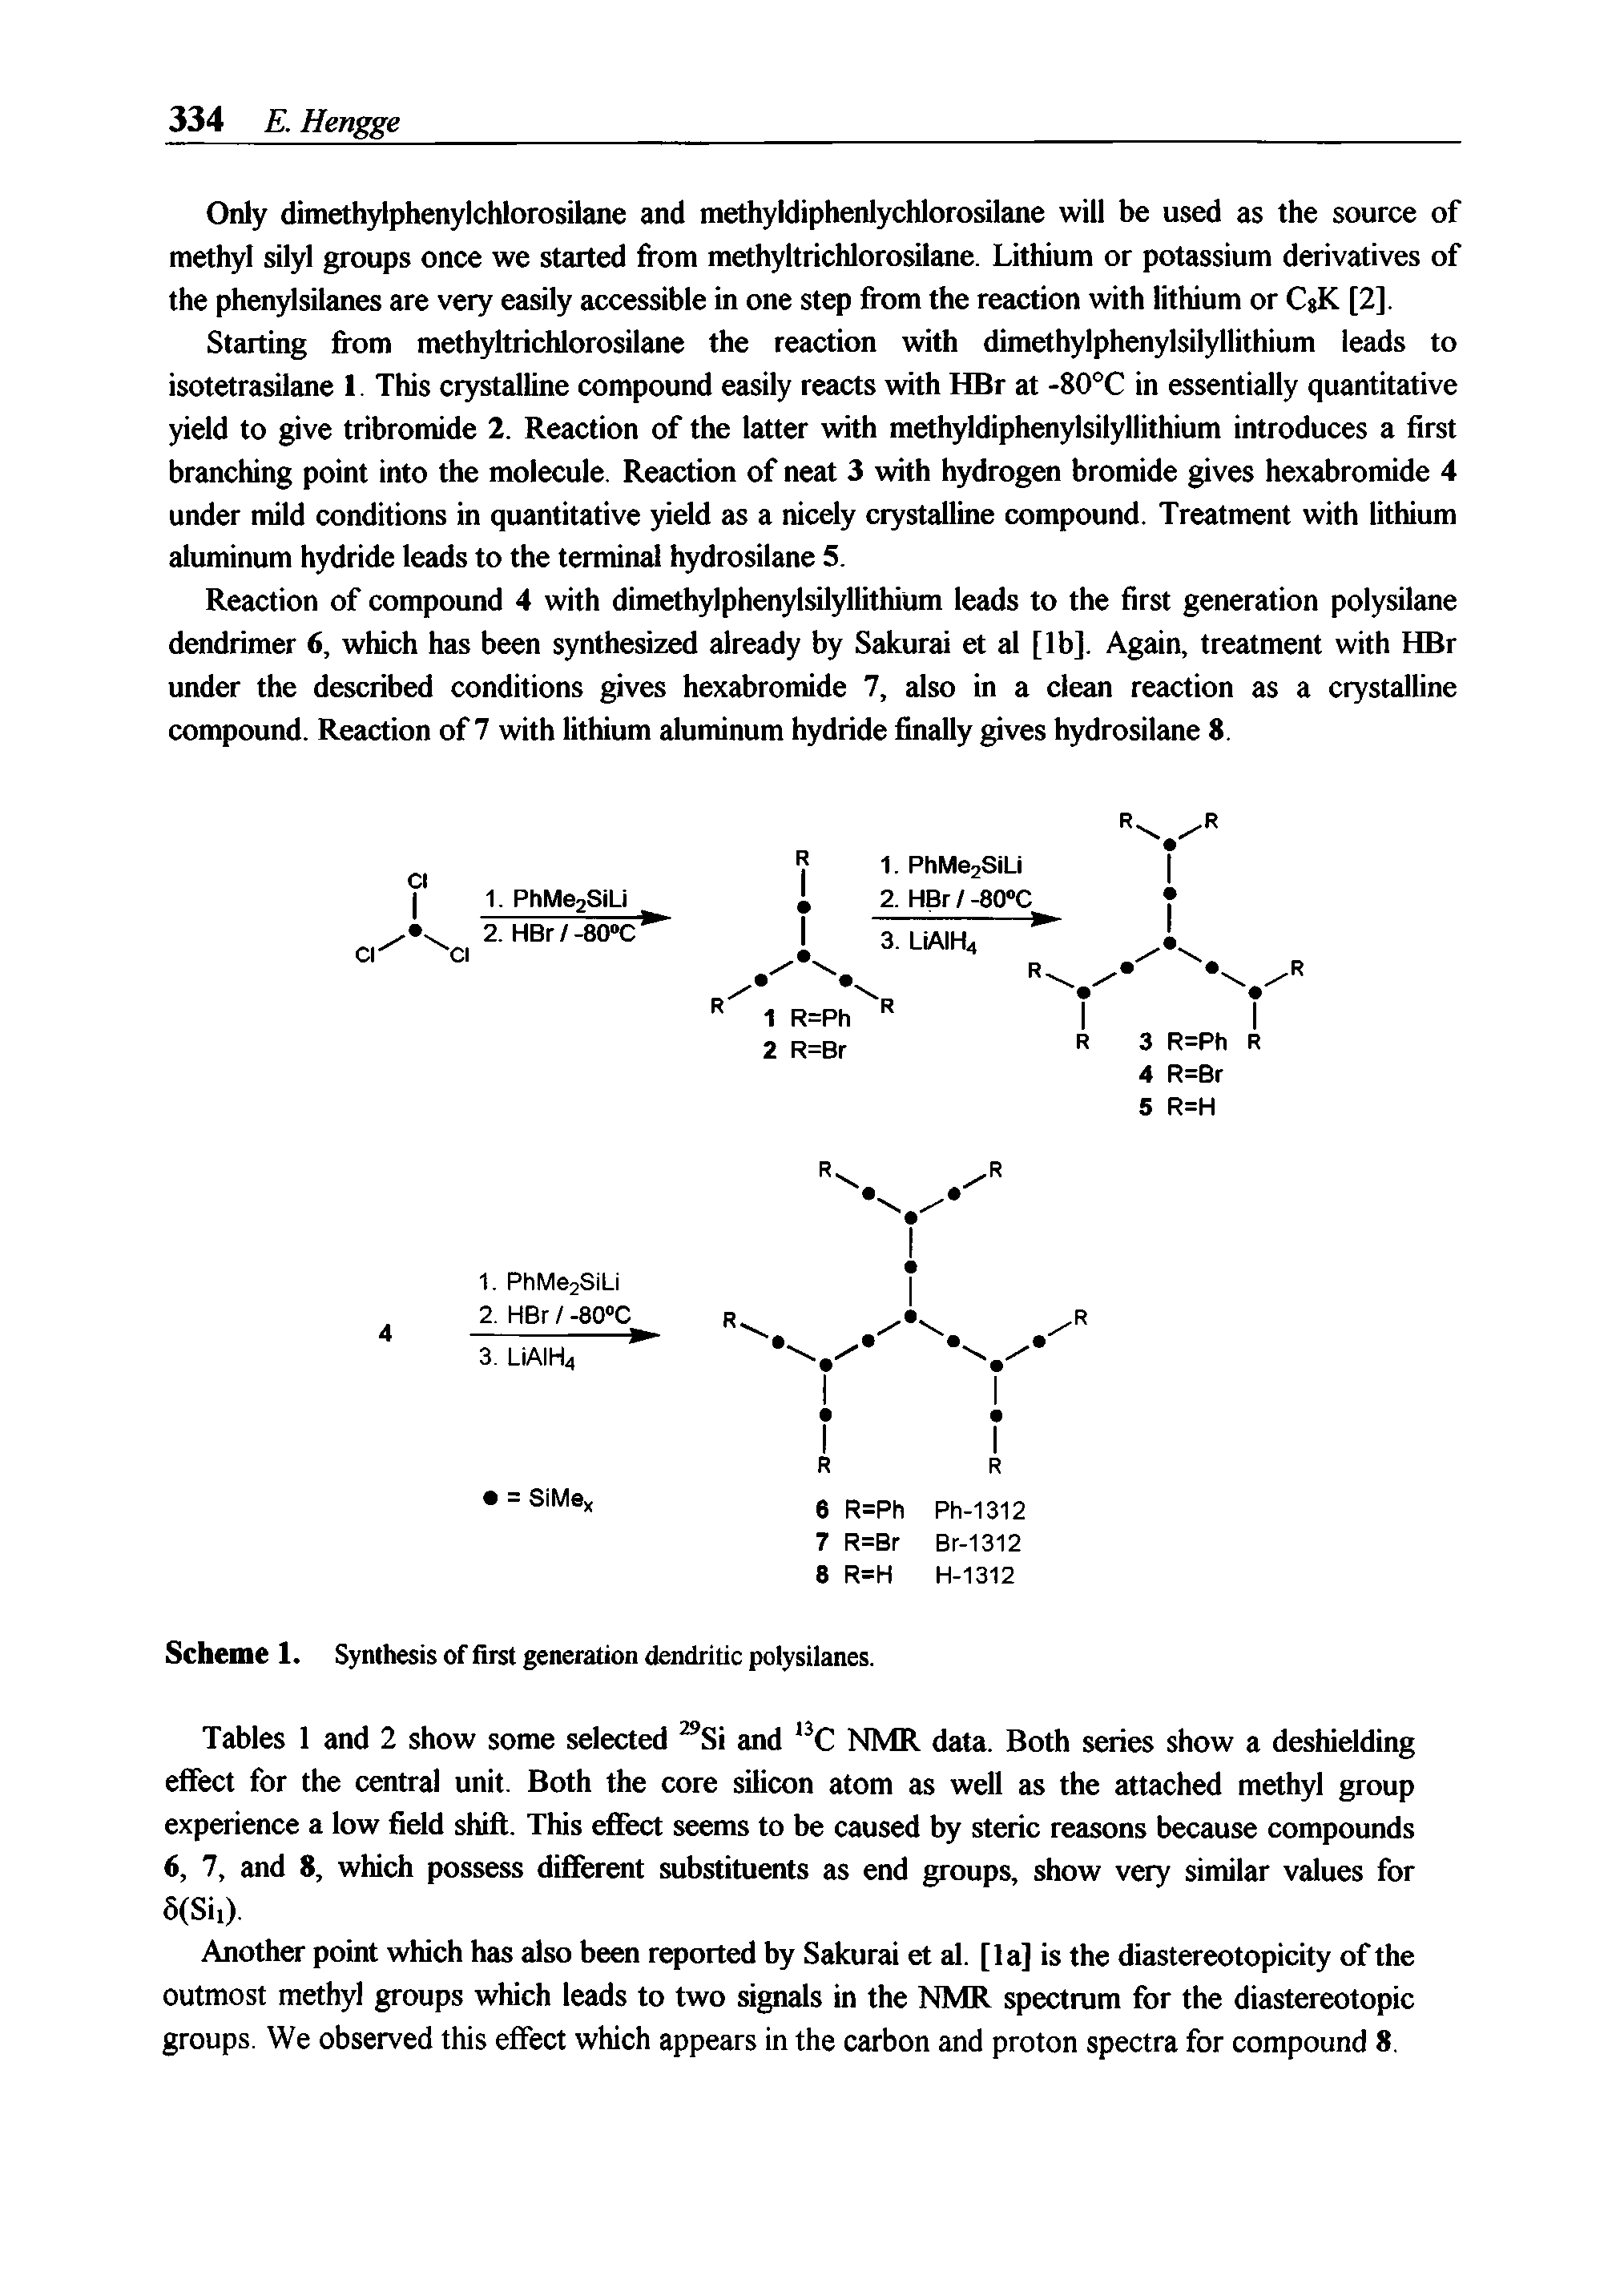 Scheme 1. Synthesis of first generation dendritic polysilanes.